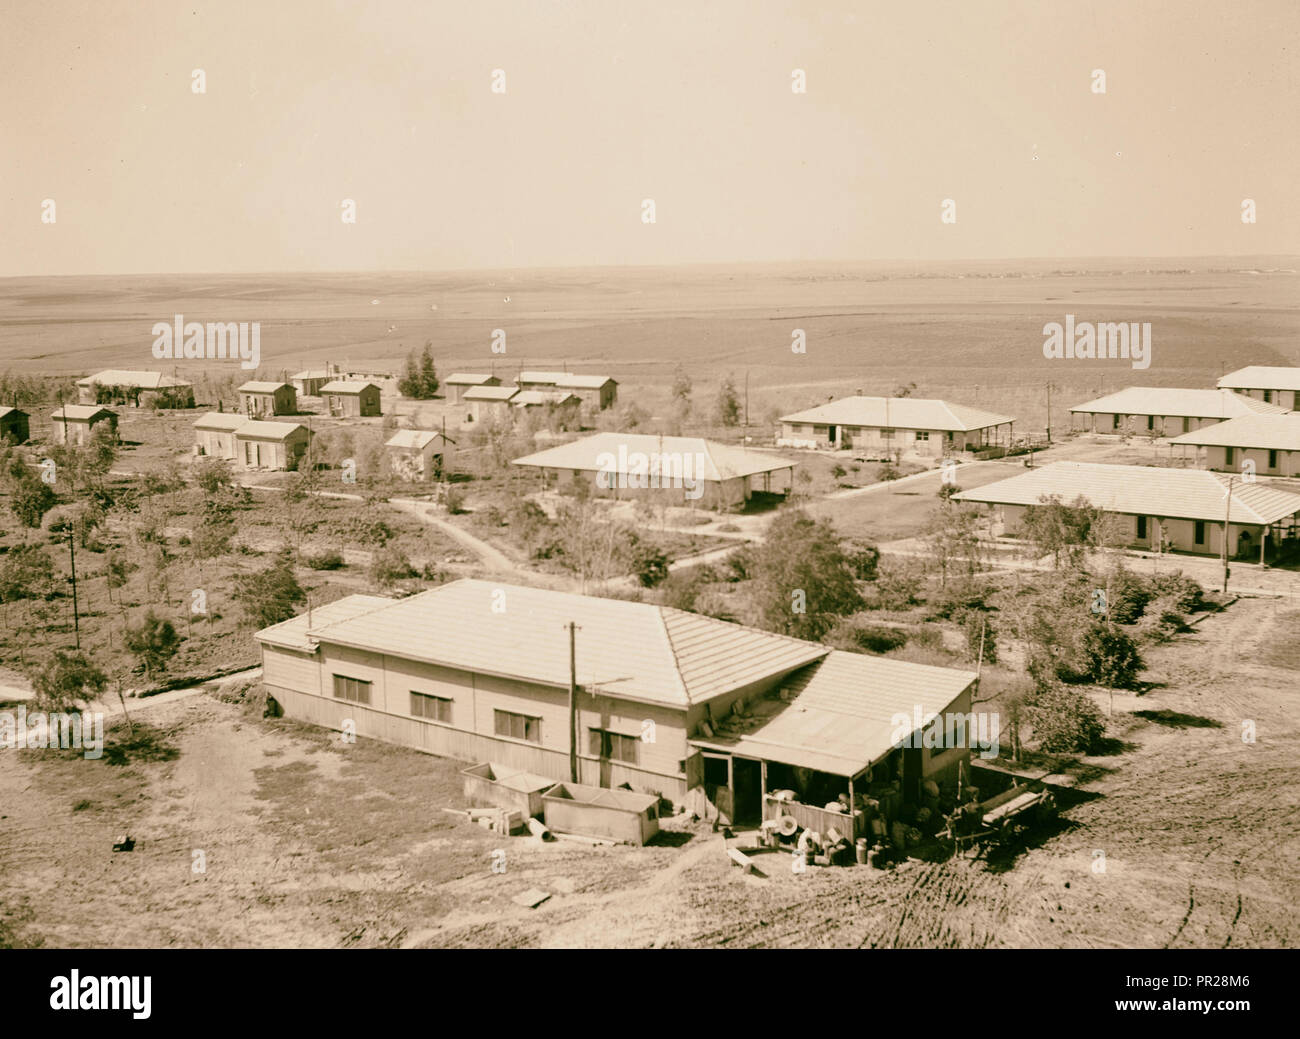 Jewish settlement of Gat near ancient Gath, east of Gaza road, founded in 1941. 1946, Israel, Gat Stock Photo